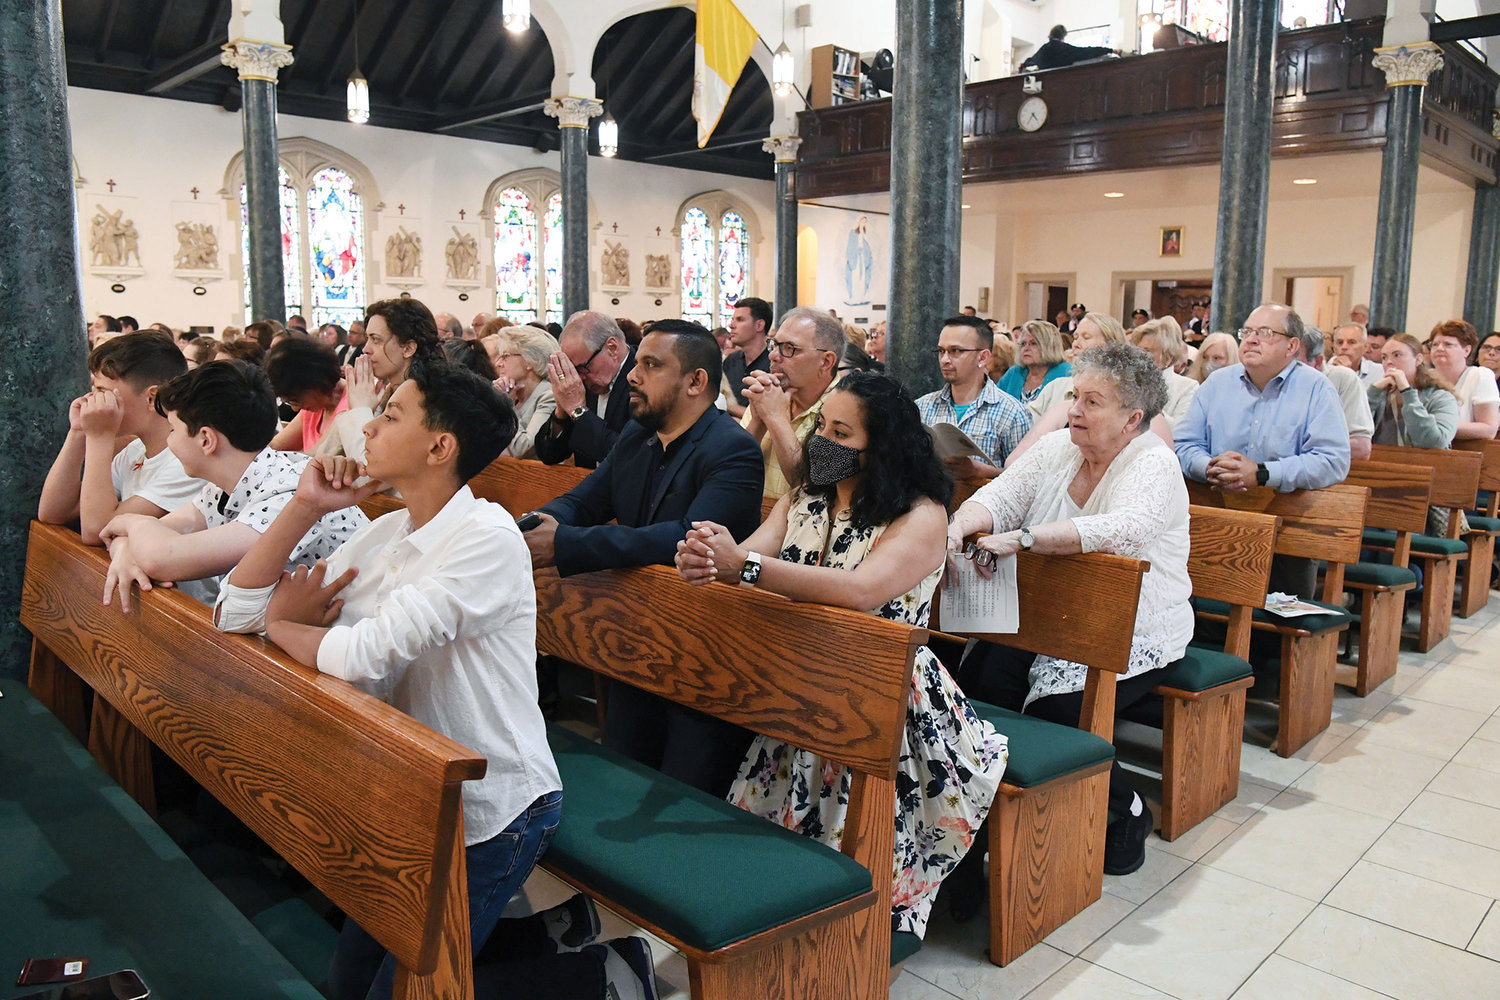 Parishioners fill the pews and prayerfully participate in the special Mass.